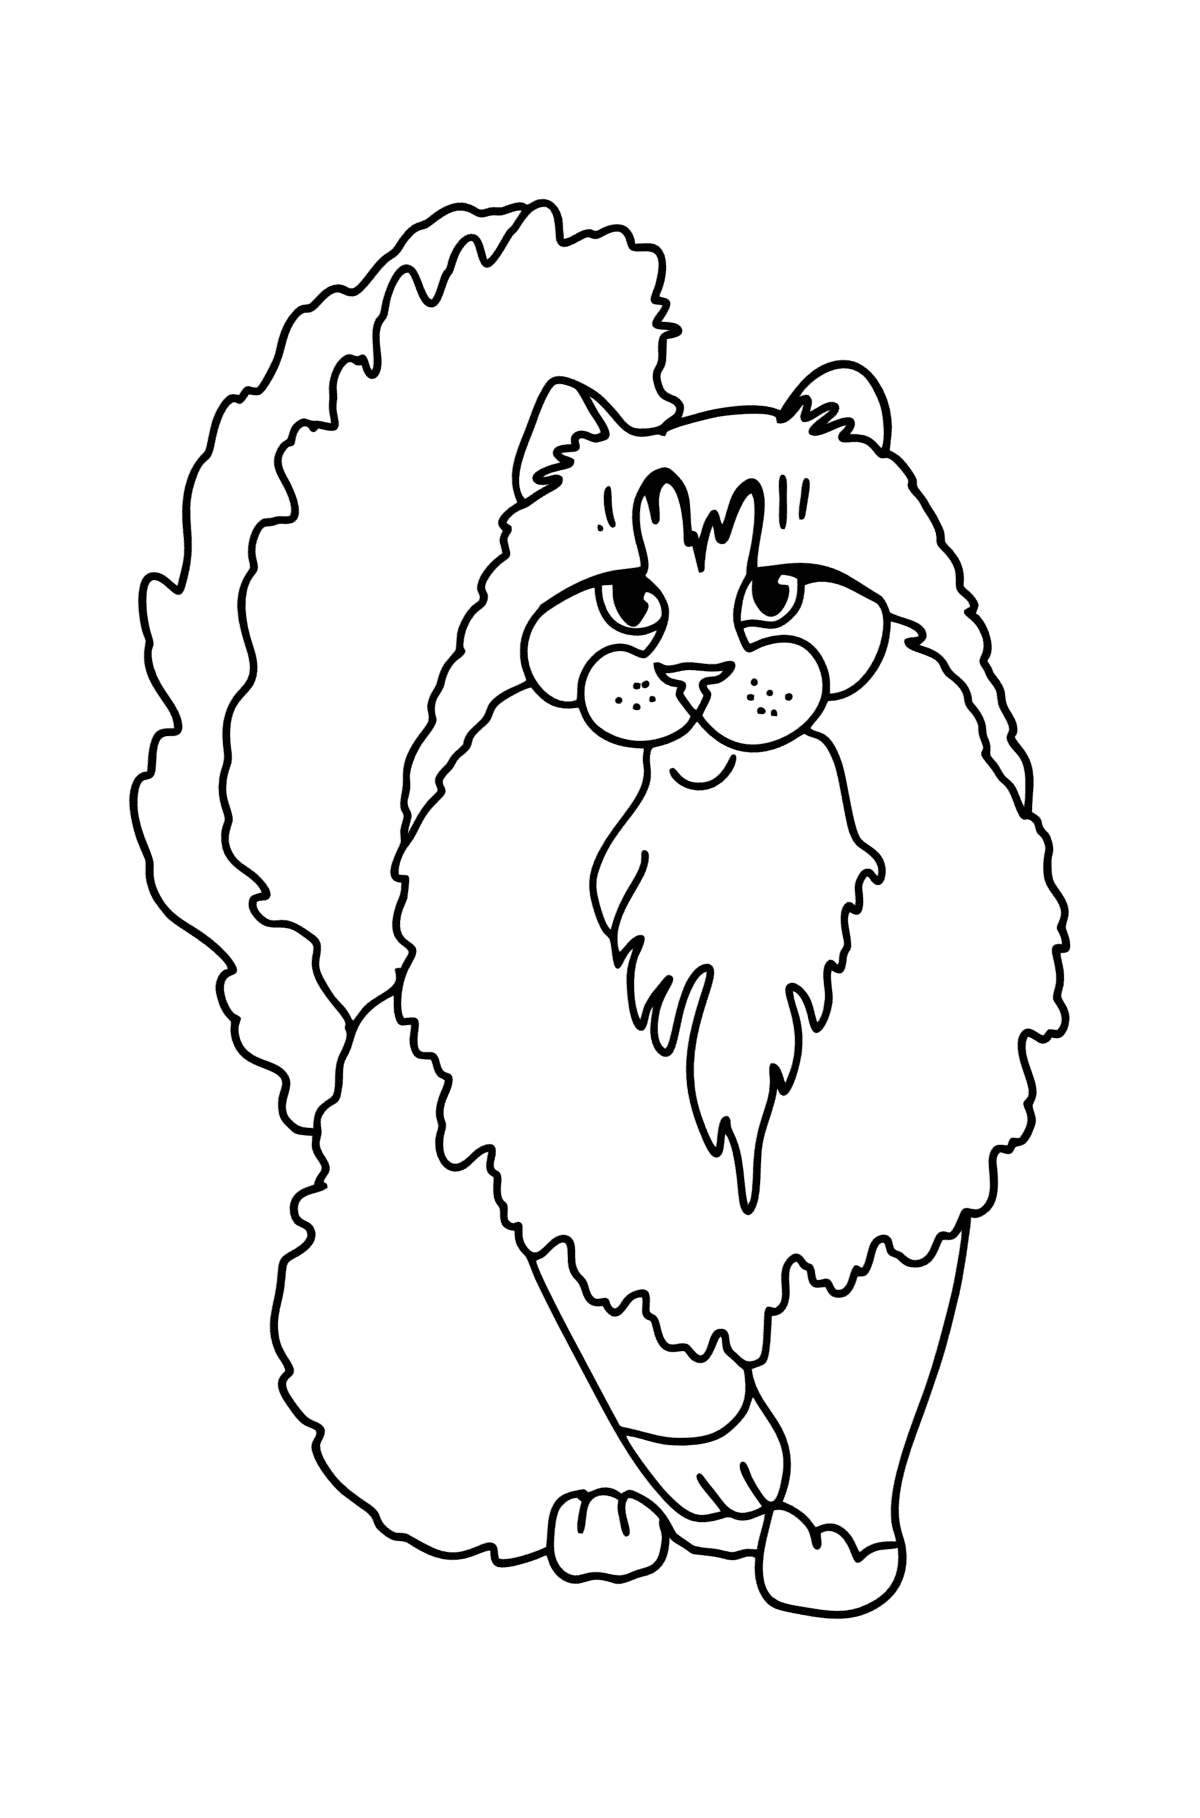 Norwegian Forest Cat coloring page - Coloring Pages for Kids